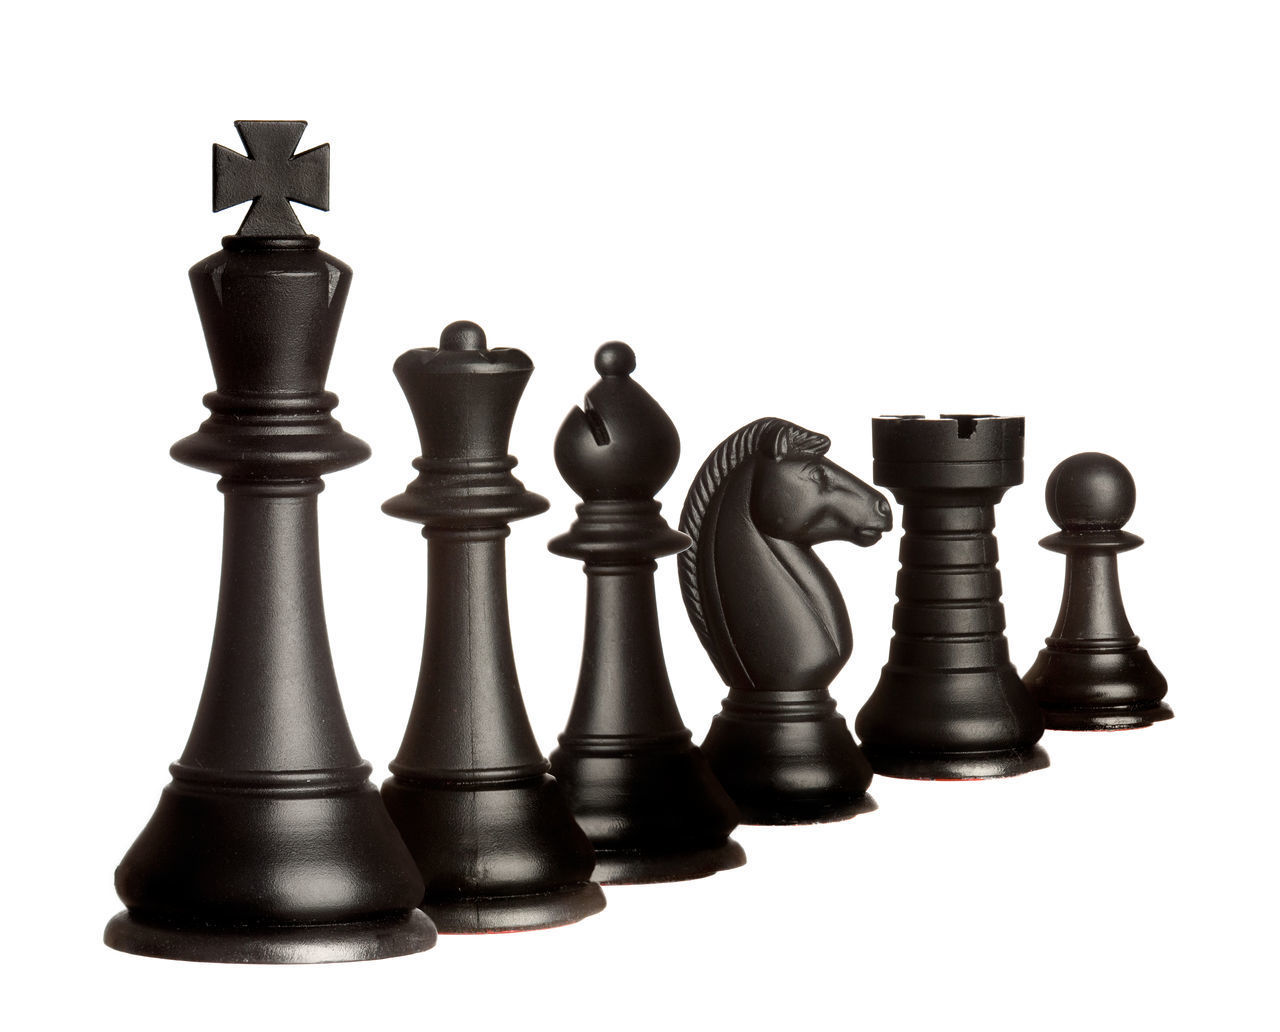 LOW ANGLE VIEW OF CHESS PIECES AGAINST THE BACKGROUND